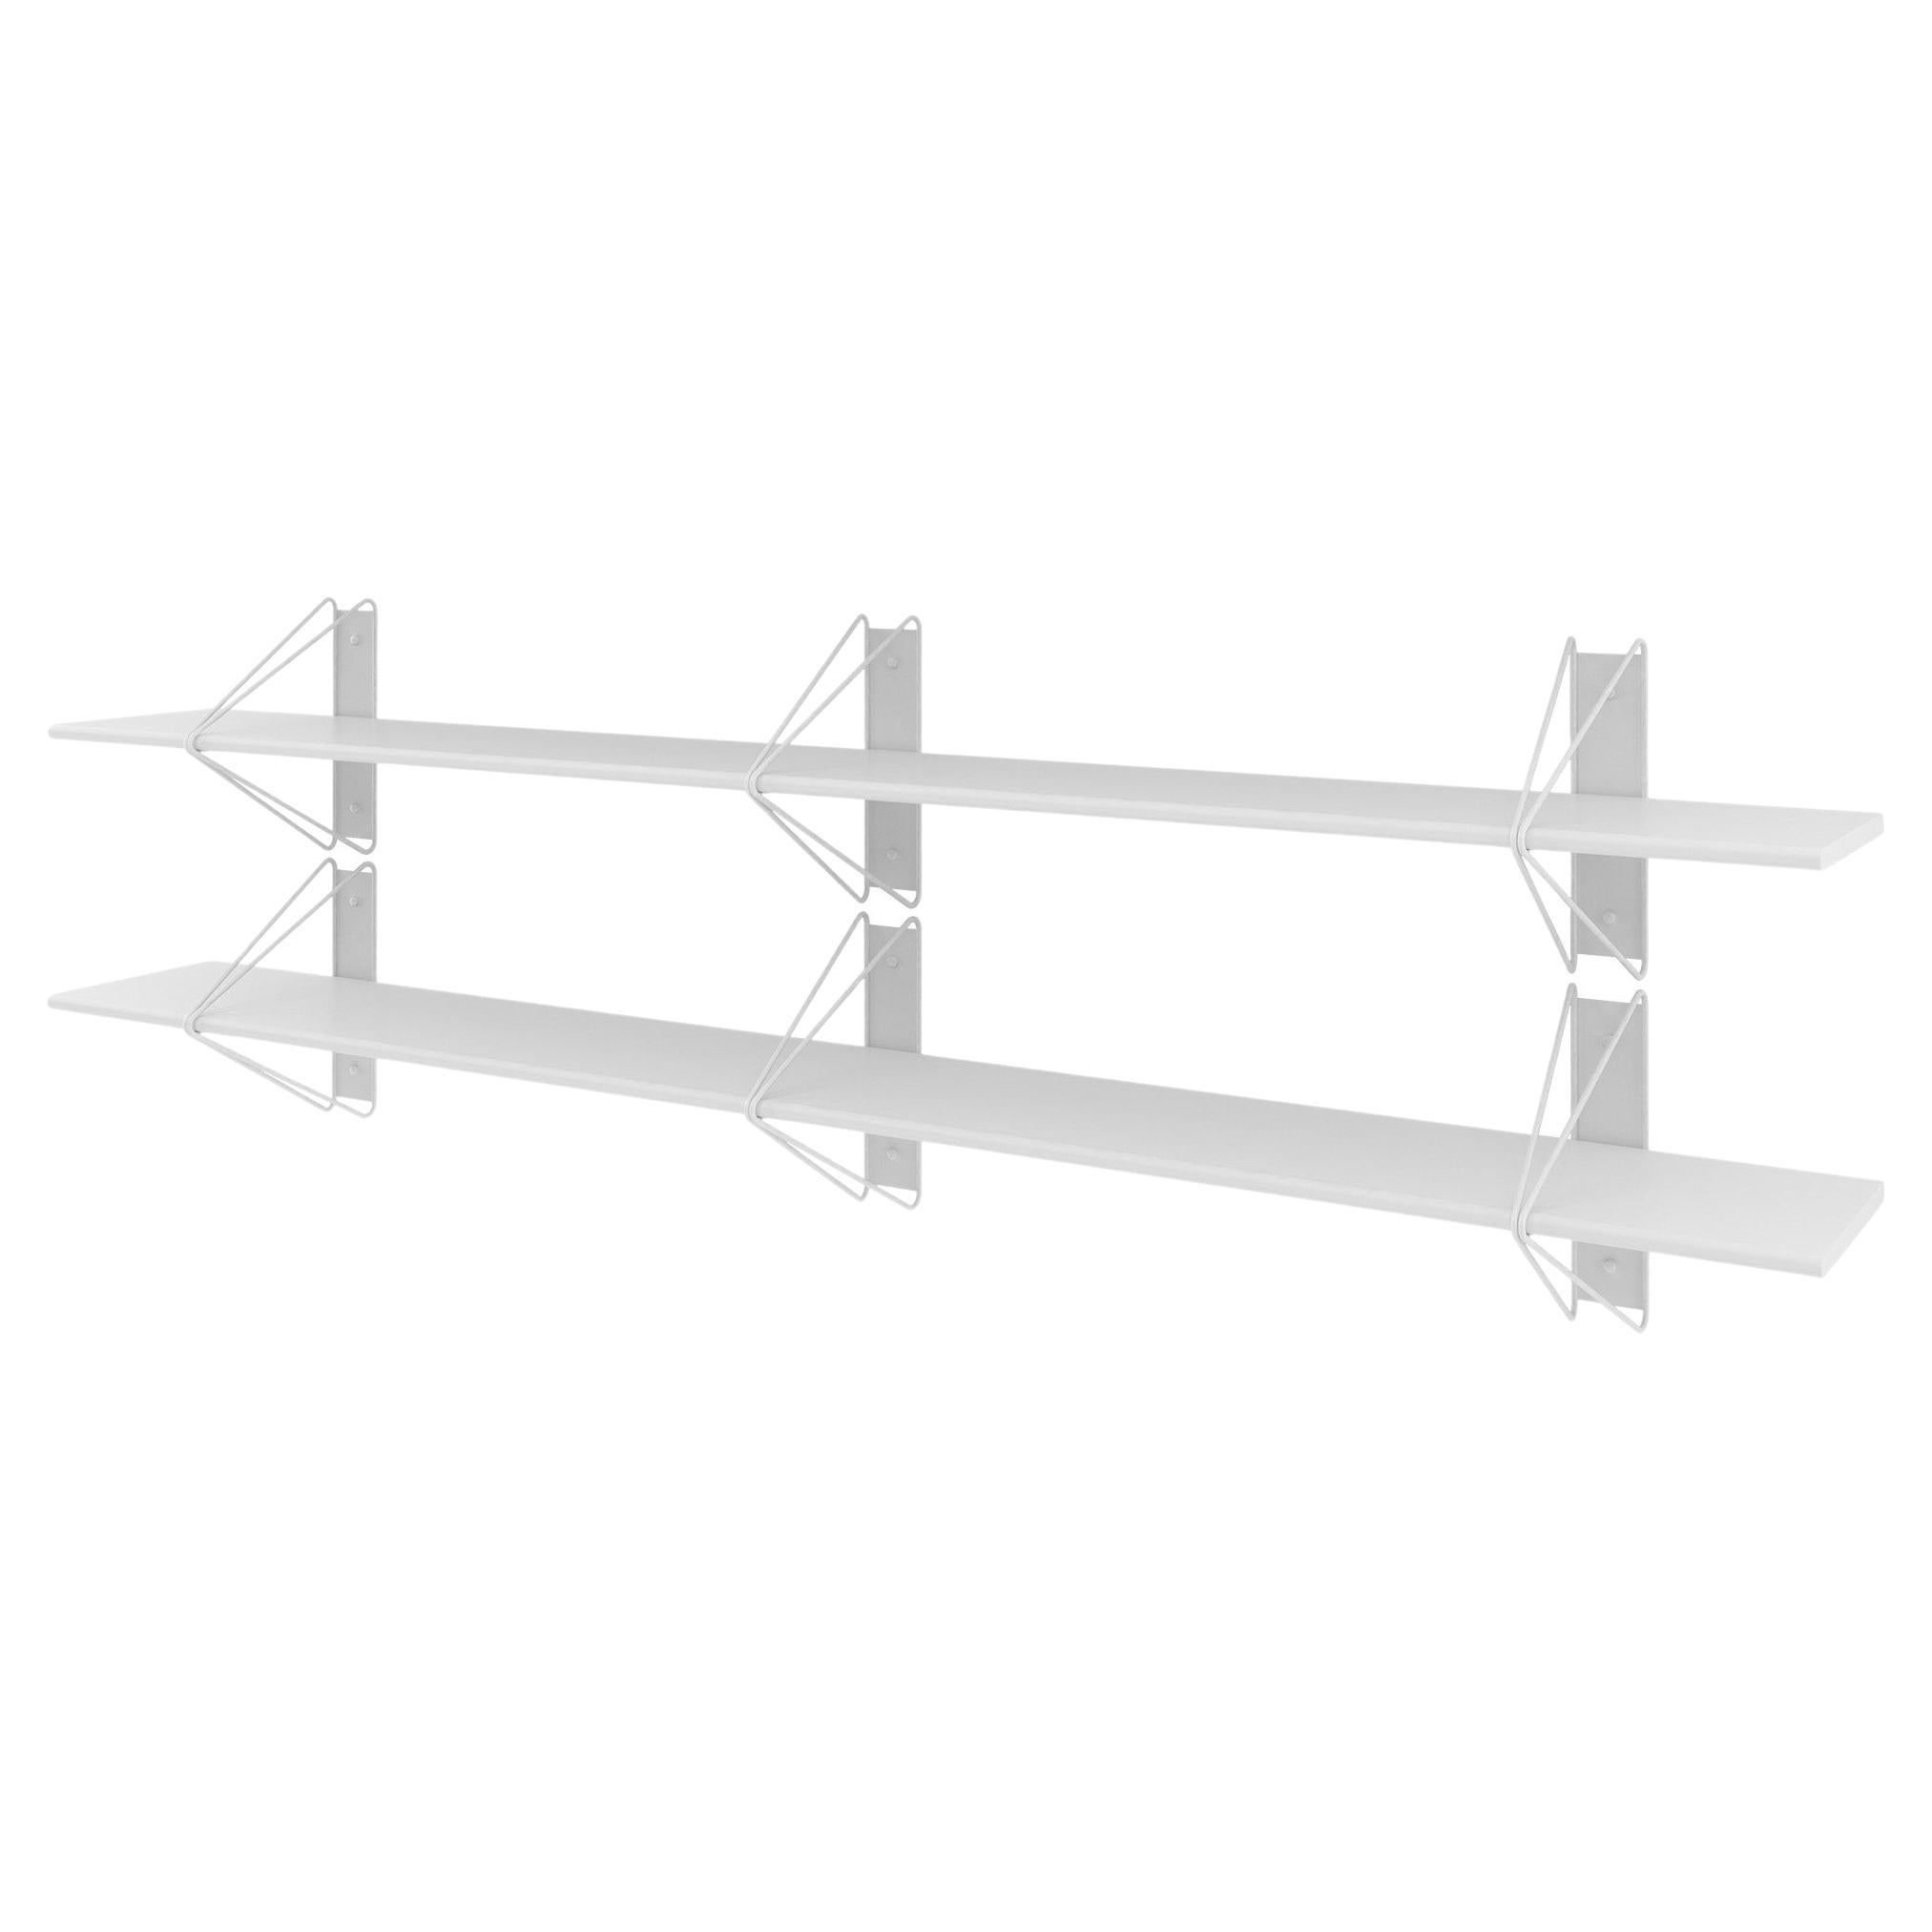 Set of 2 Strut Shelves from Souda, White, Made to Order